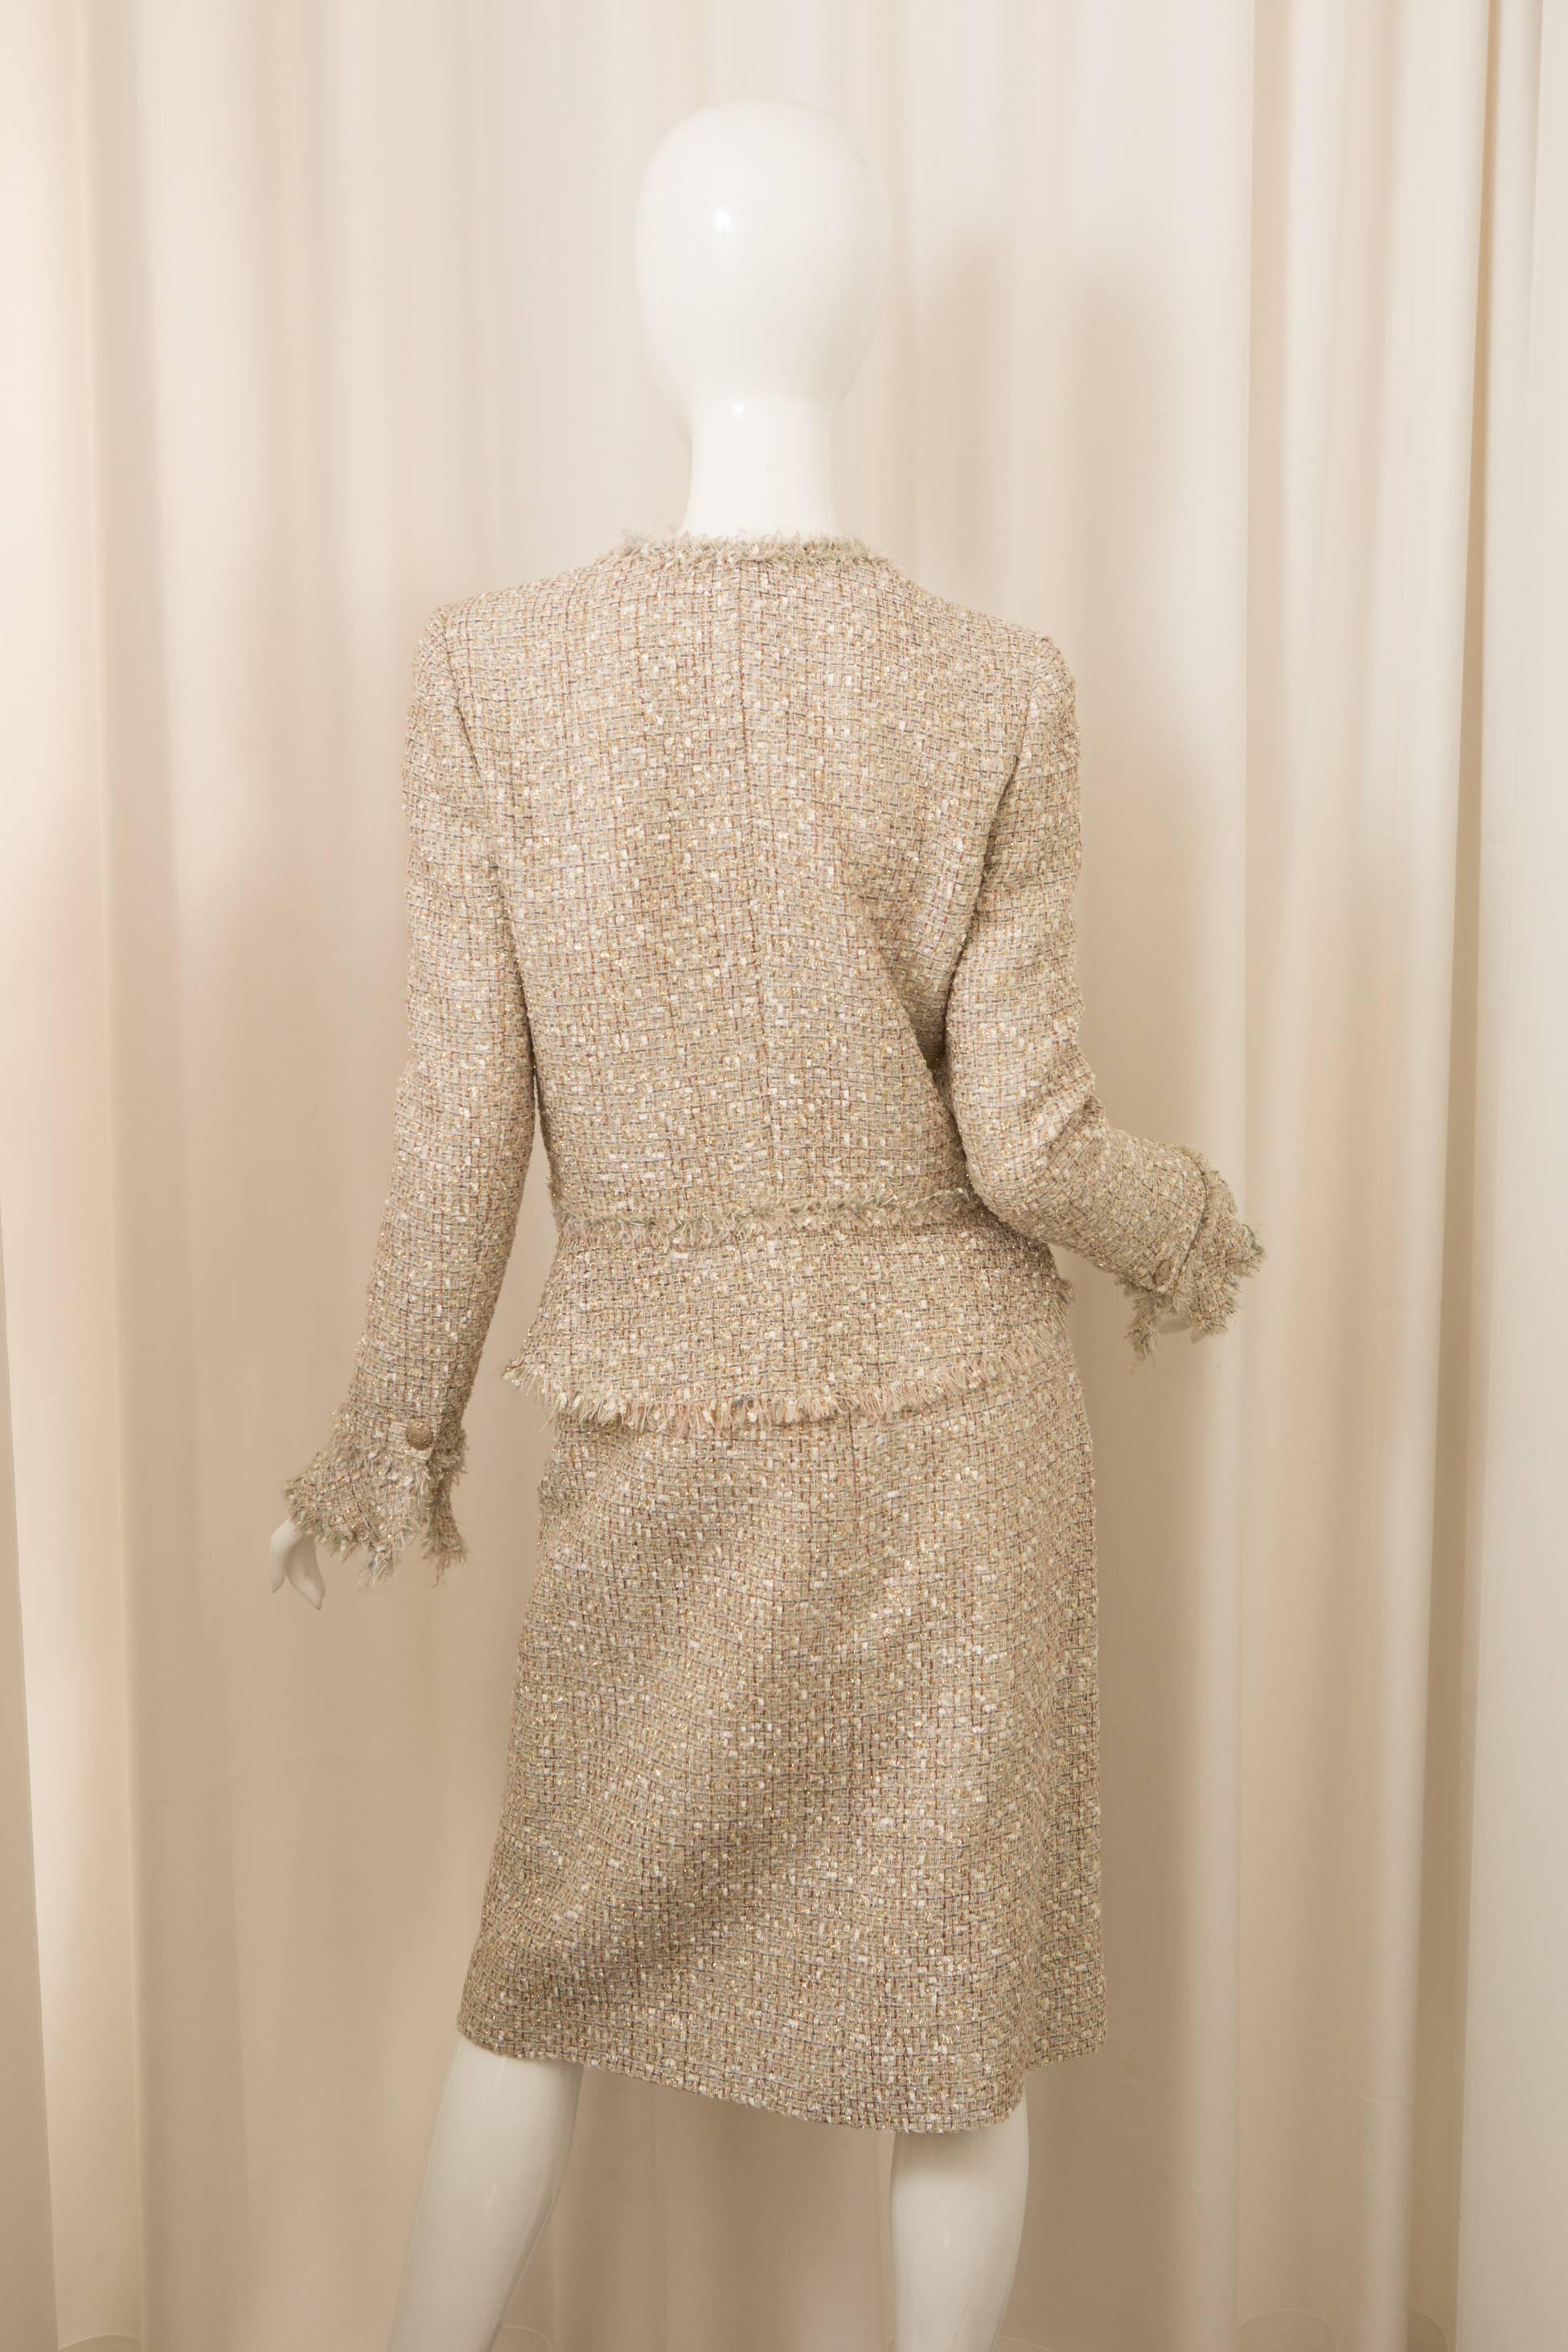 Stunning  ivory and gold tweed skirt suit.